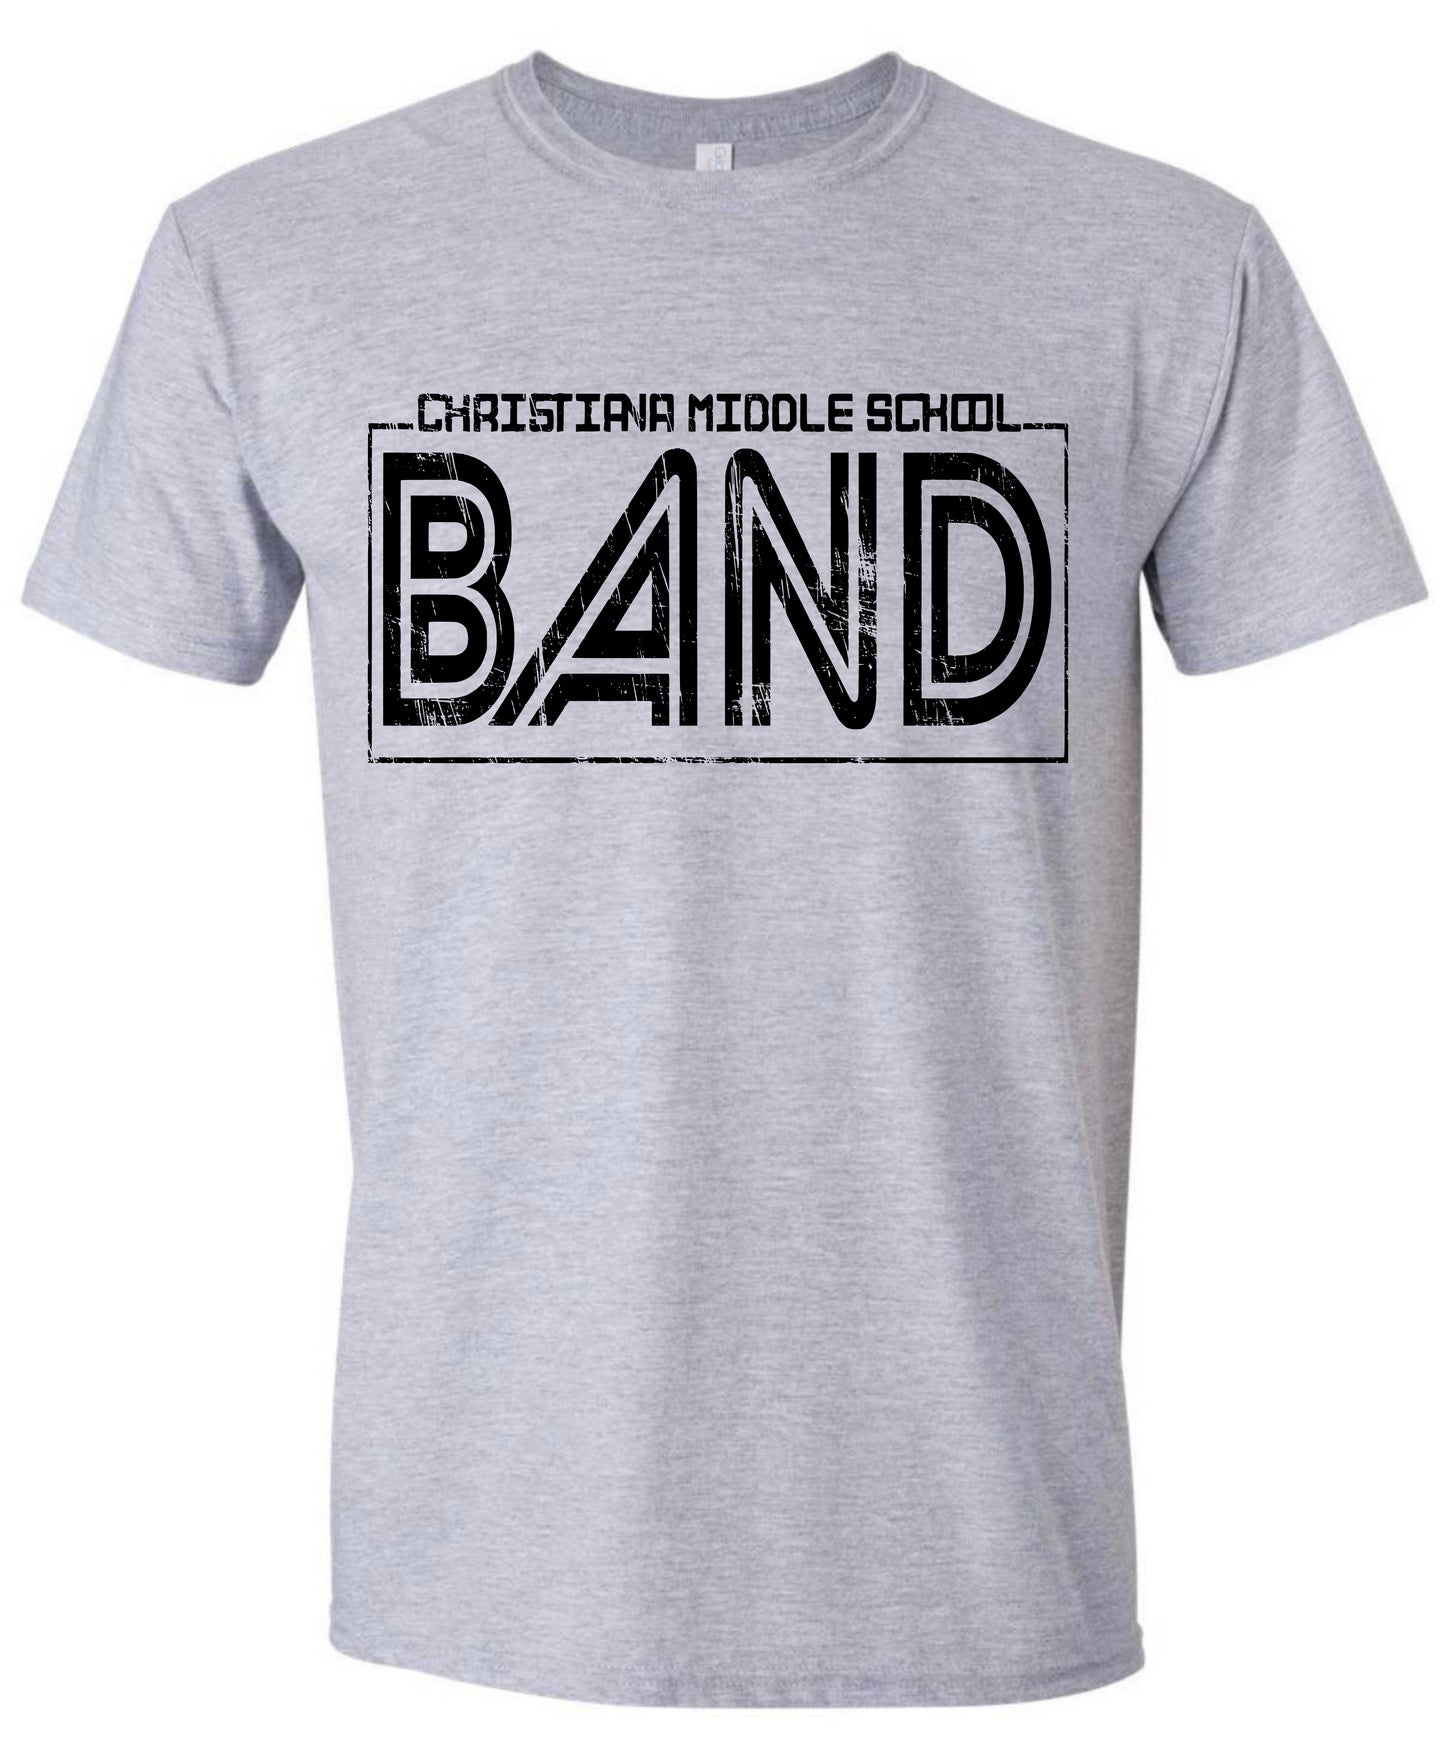 Christiana Middle School Band Distressed Tshirt